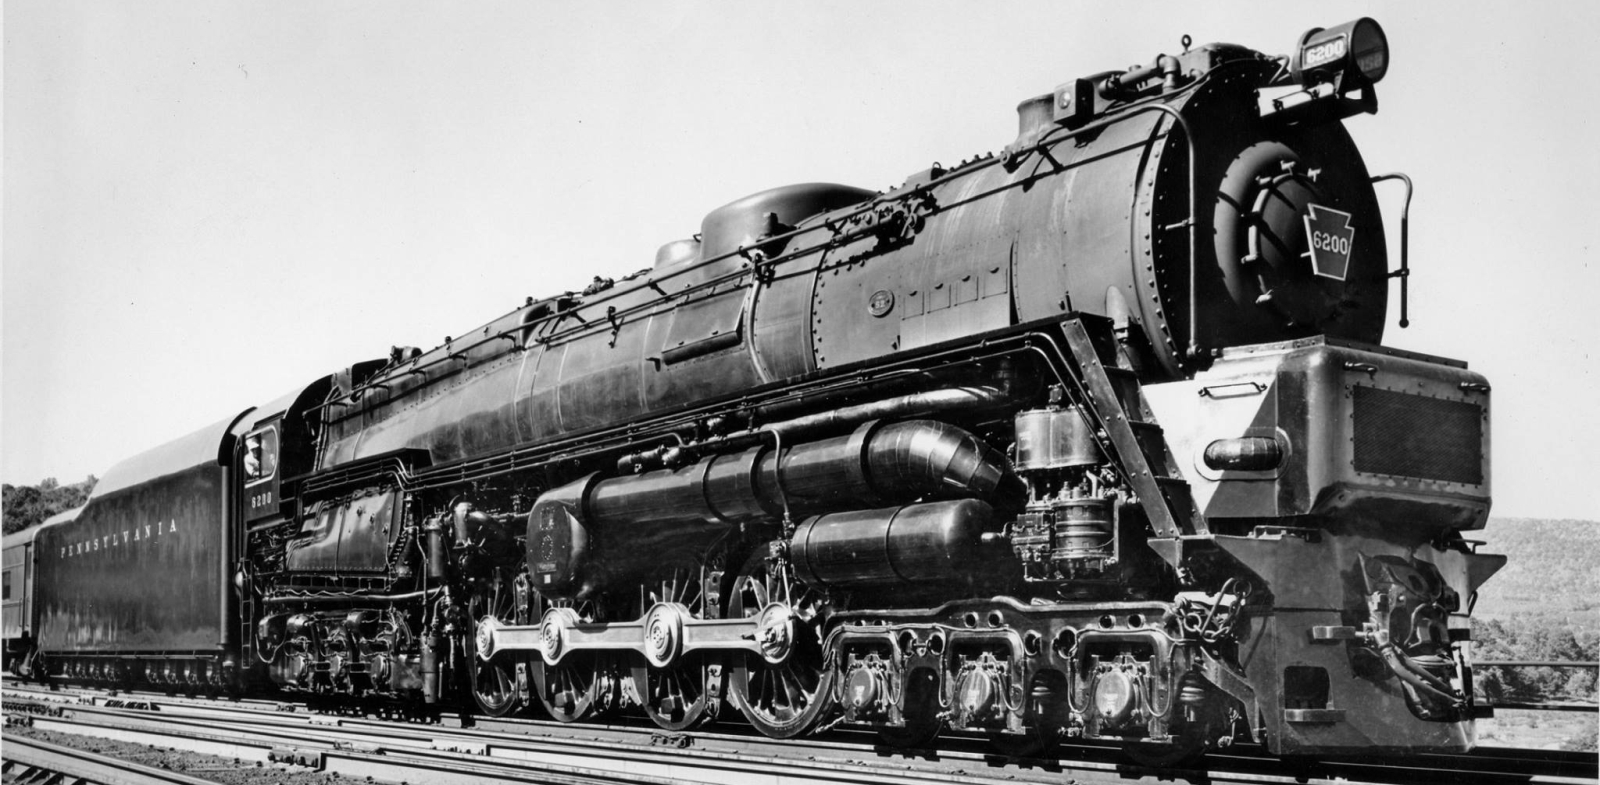 No. 6200 in March 1944